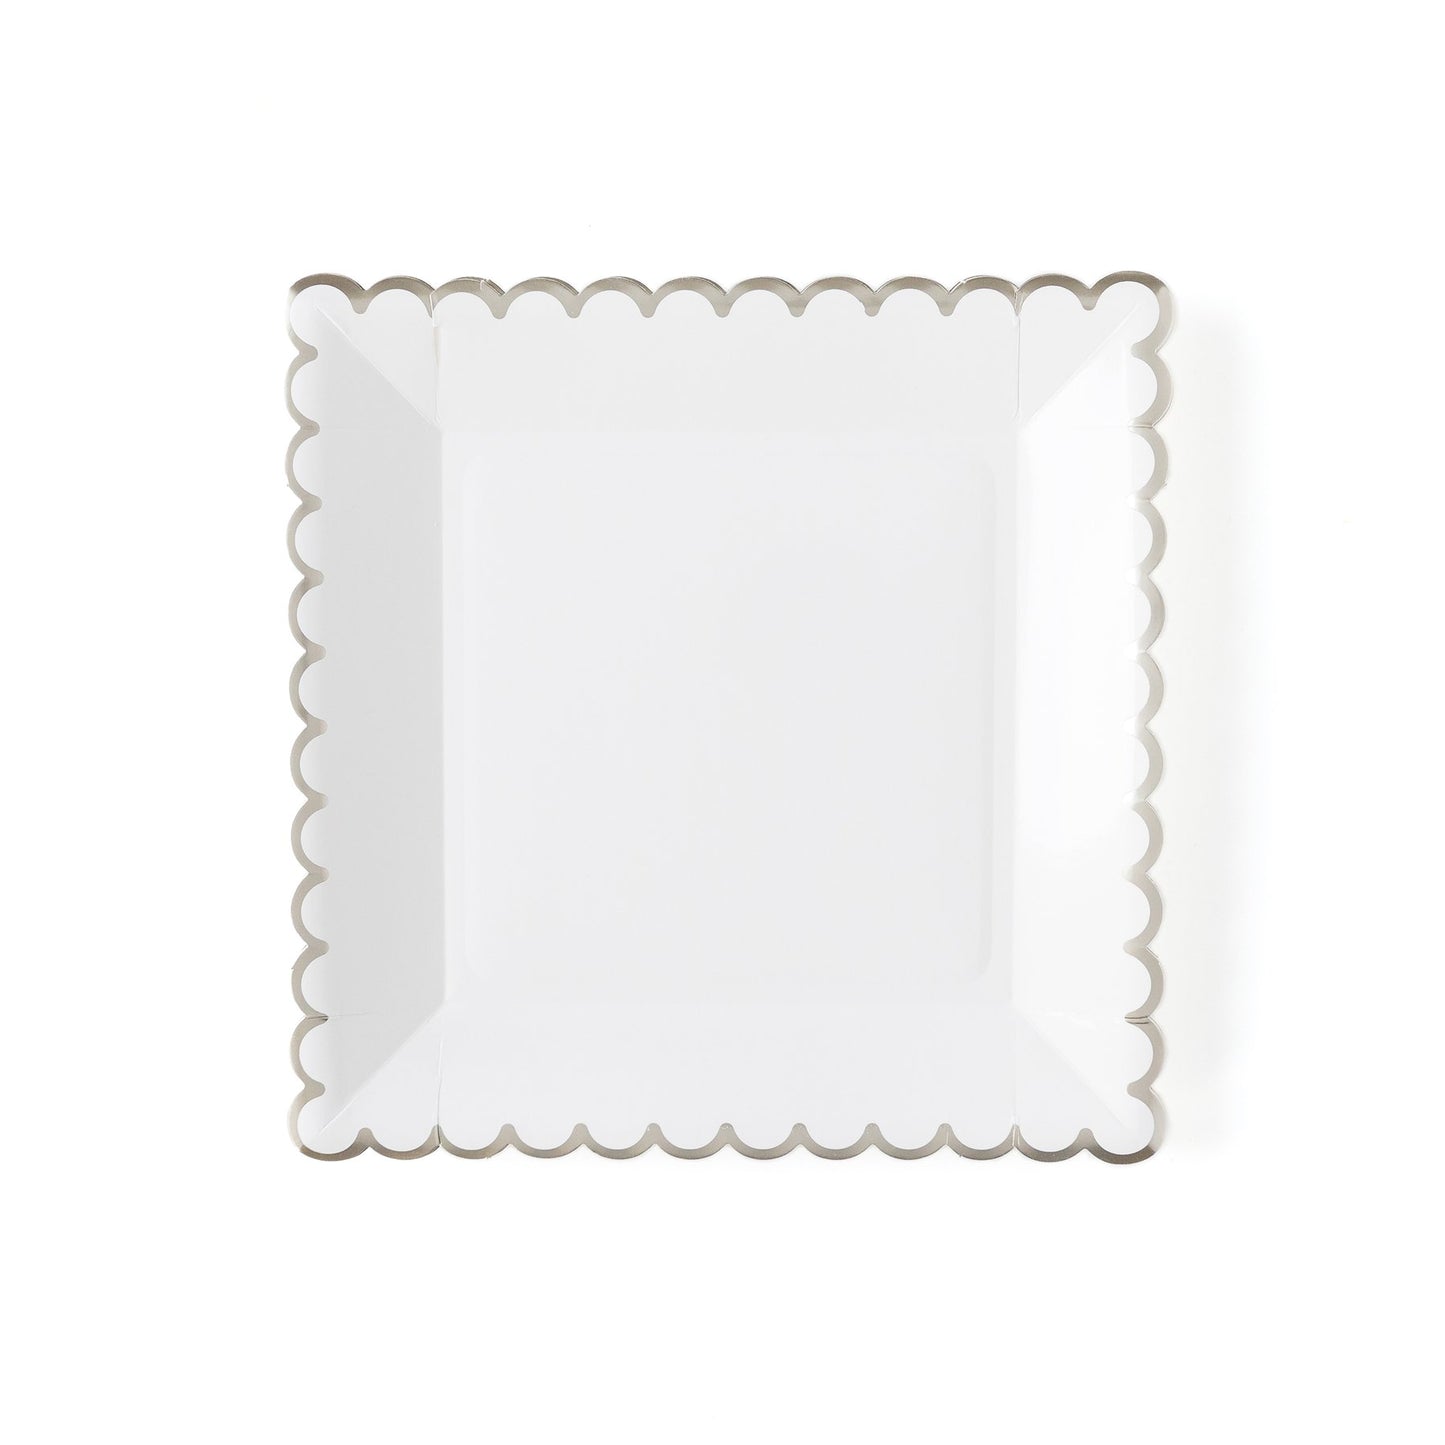 White and Silver Scalloped Plates (8 pk)